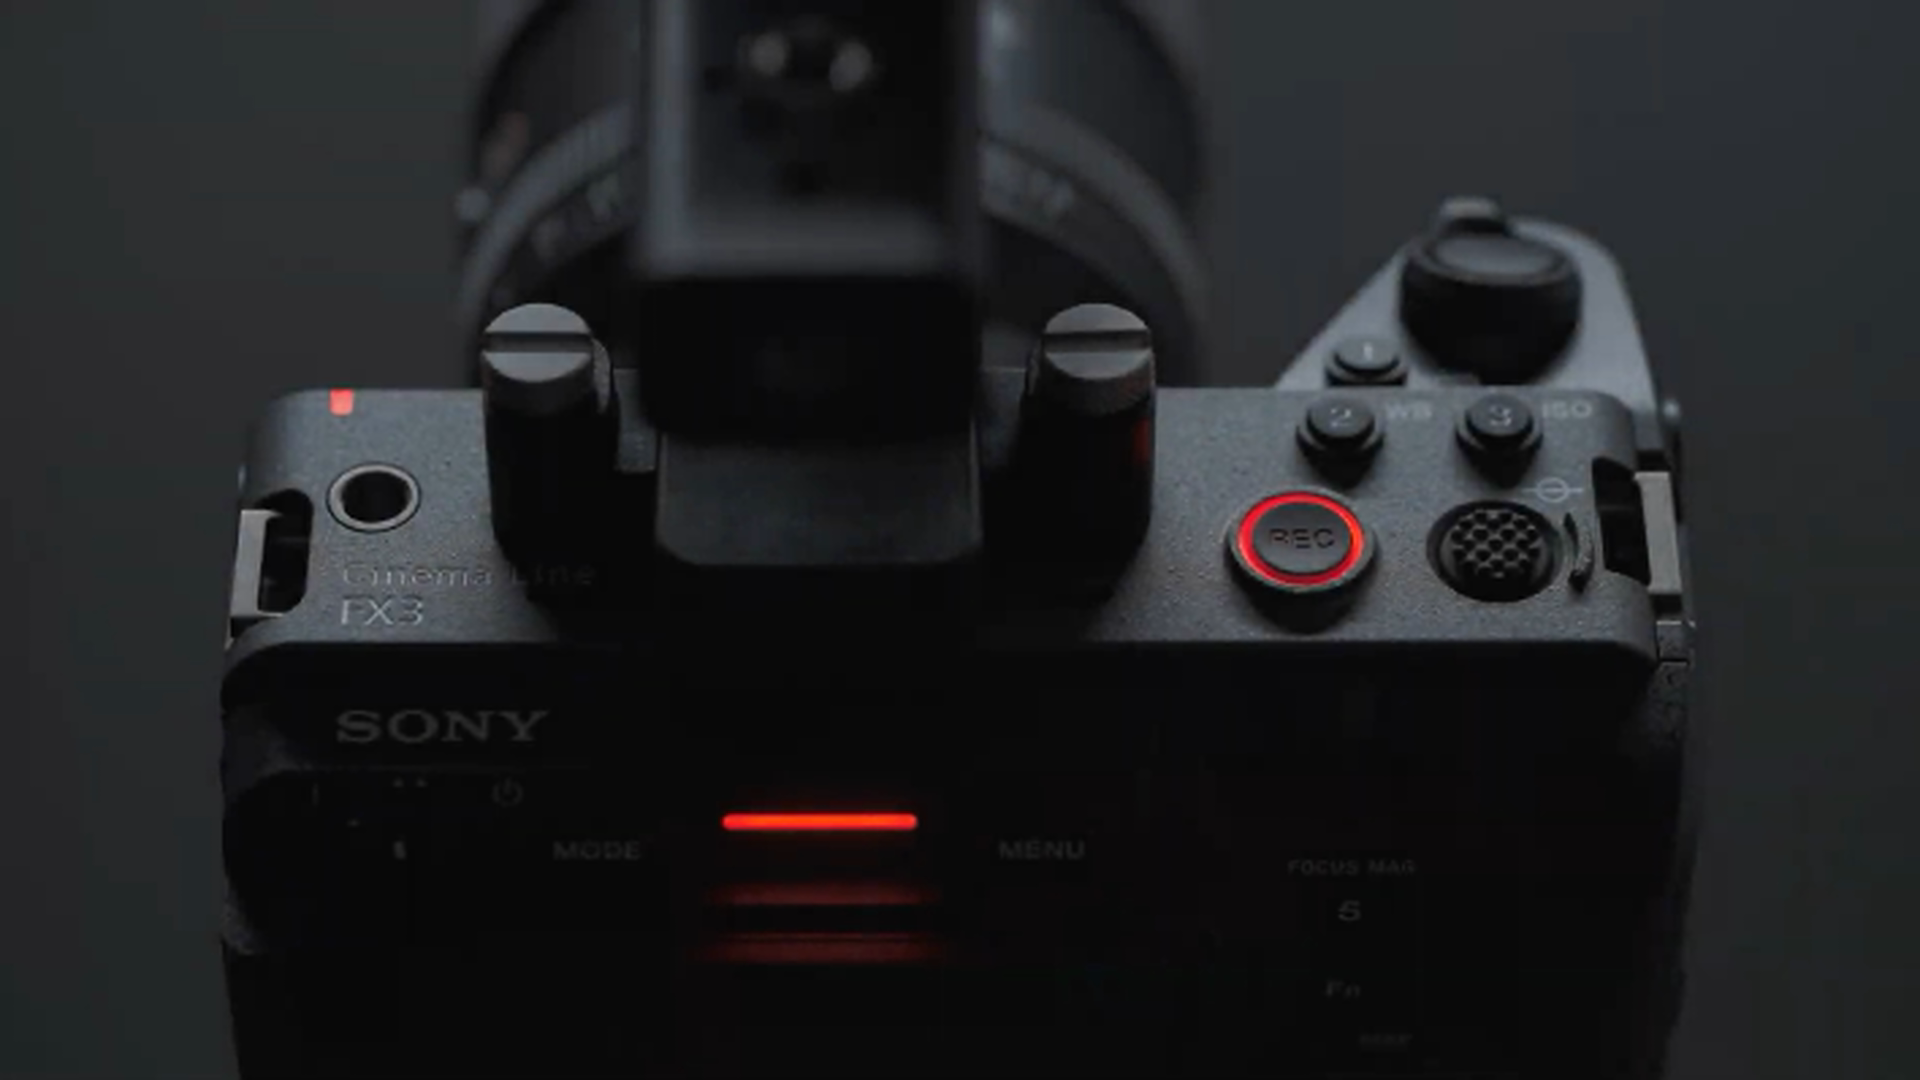 New Cinema Line camera announcement on February 23, 2021 _ Sony_20210224_000356.800.png